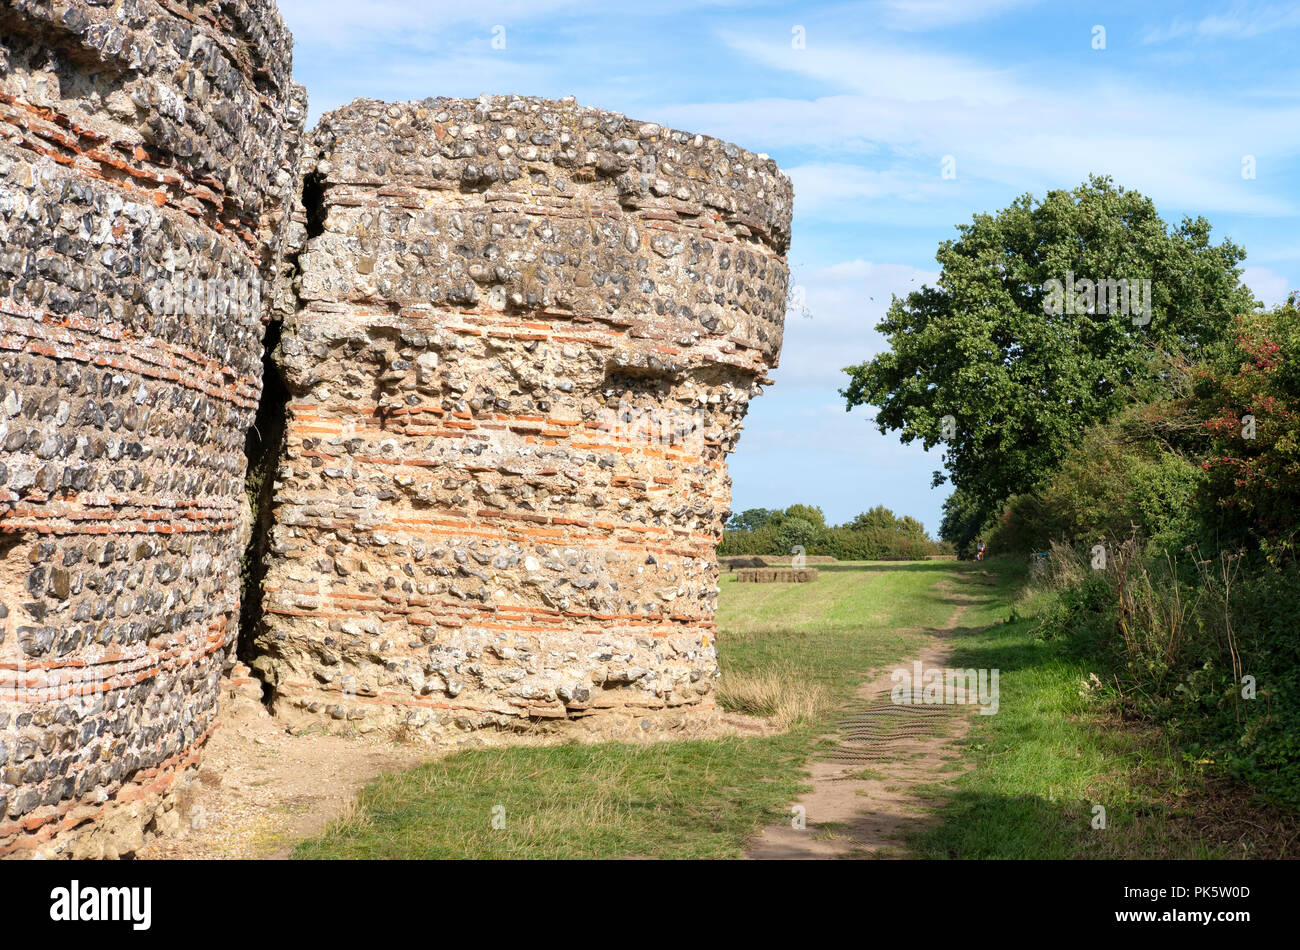 Remains of the south wall and a bastion of Burgh Roman Fort also known as Gariannonum, Garannum, Caister-on-Sea, Norfolk, England, UK Stock Photo